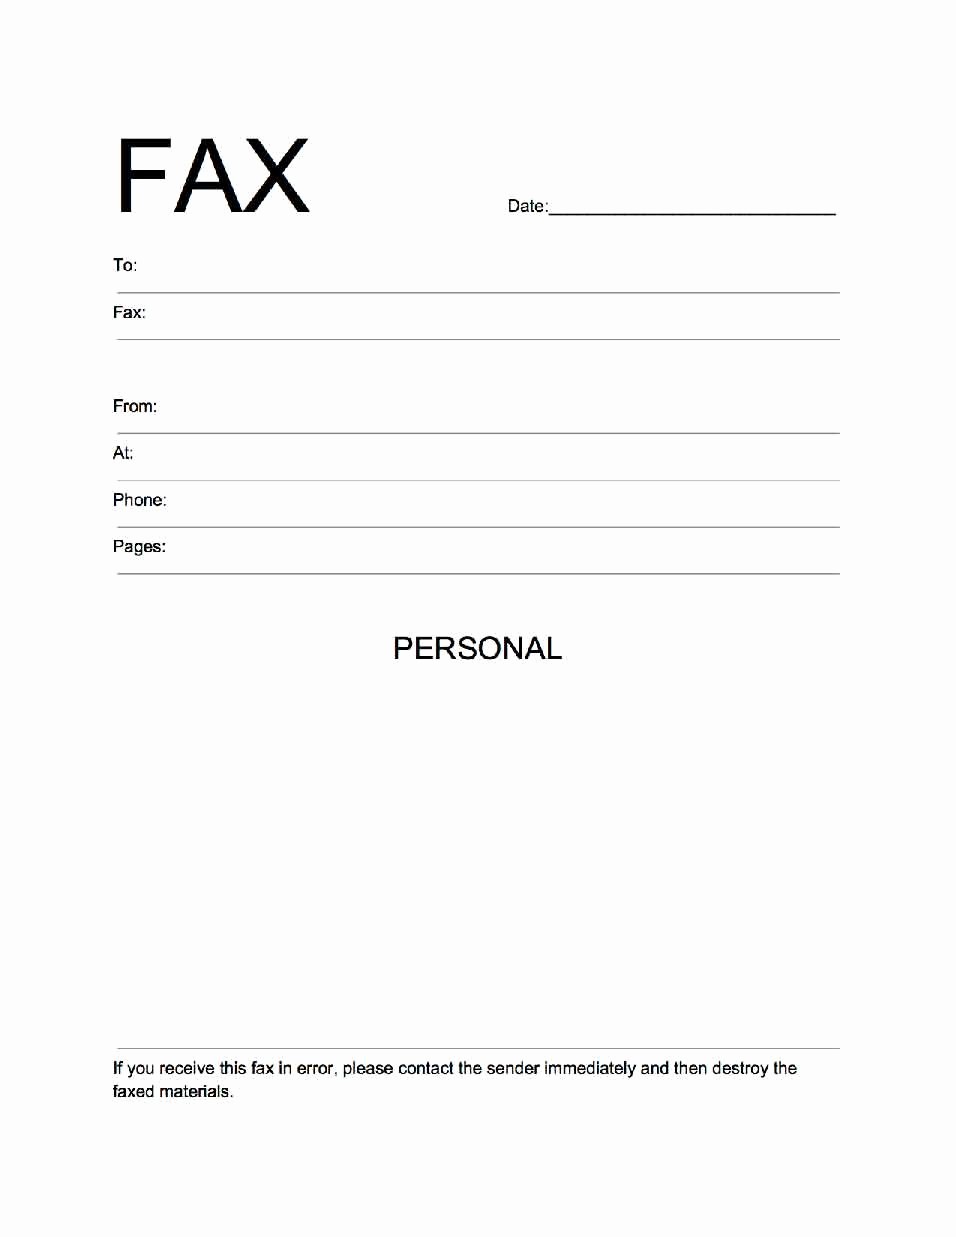 Fax Front Cover Sheet Template Unique Fax Front Sheet Template Filename